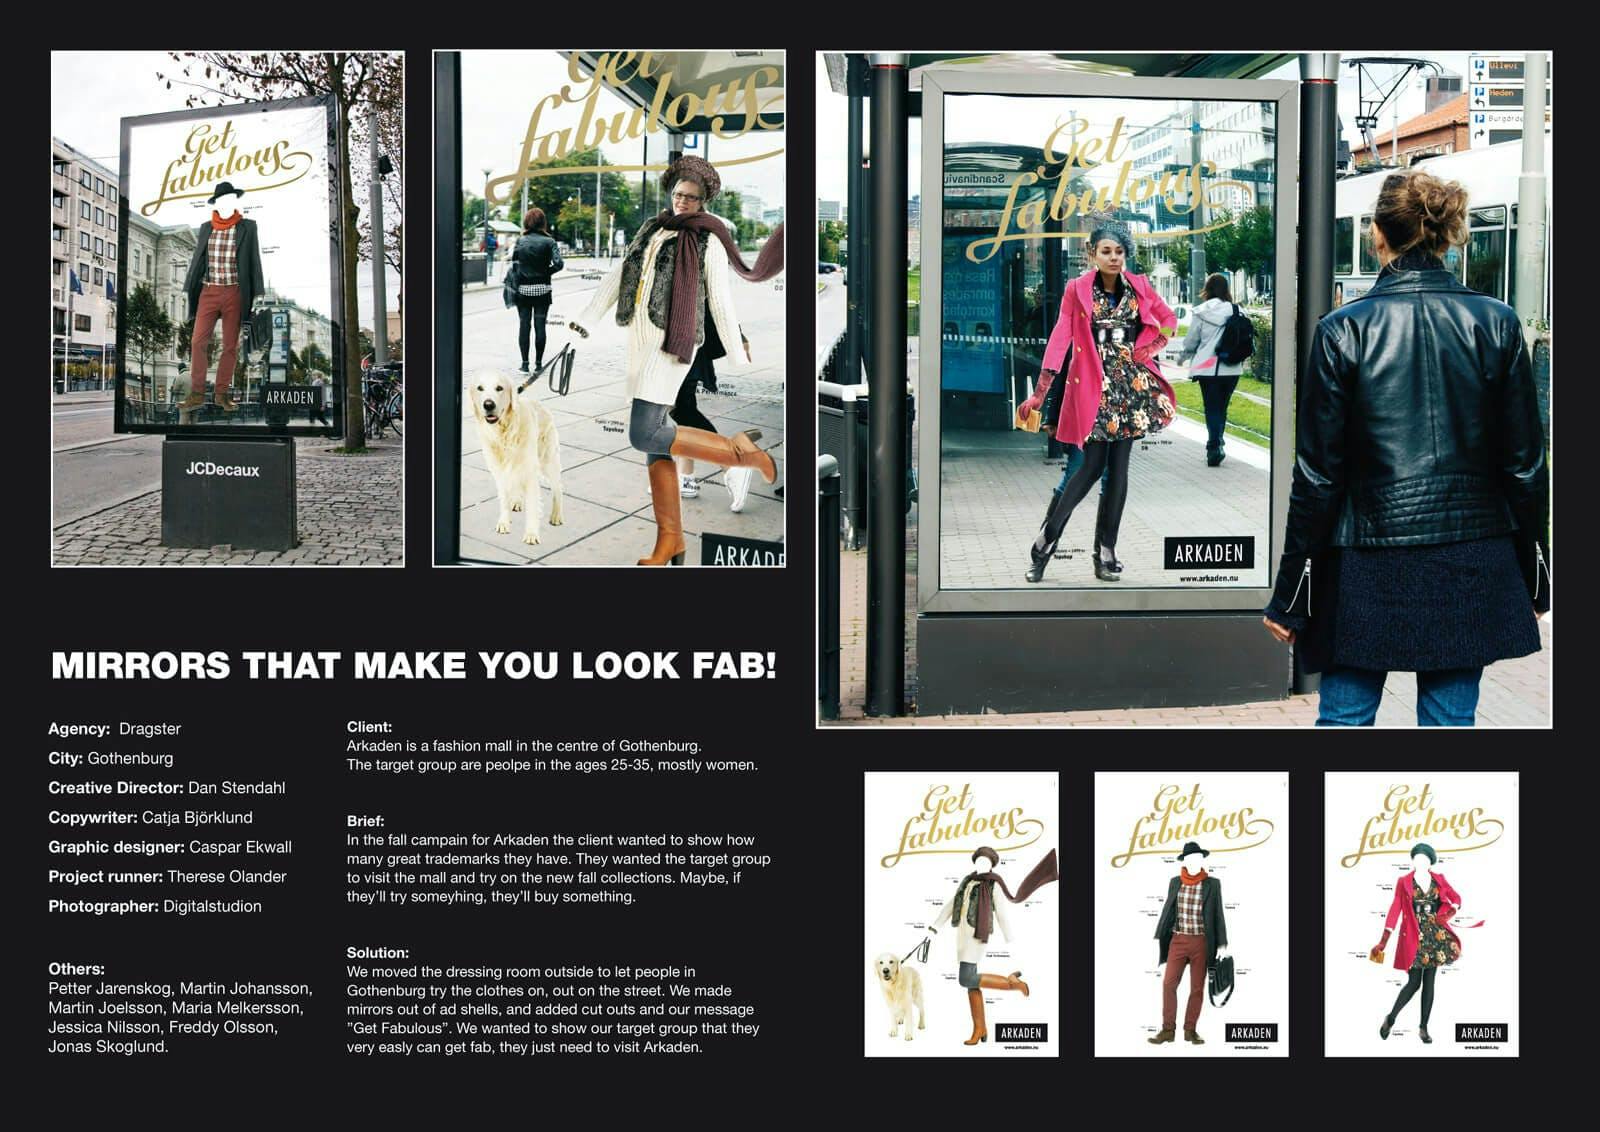 Mirrors that make you look fab - guerrilla campaign of a mall in Gothenburg